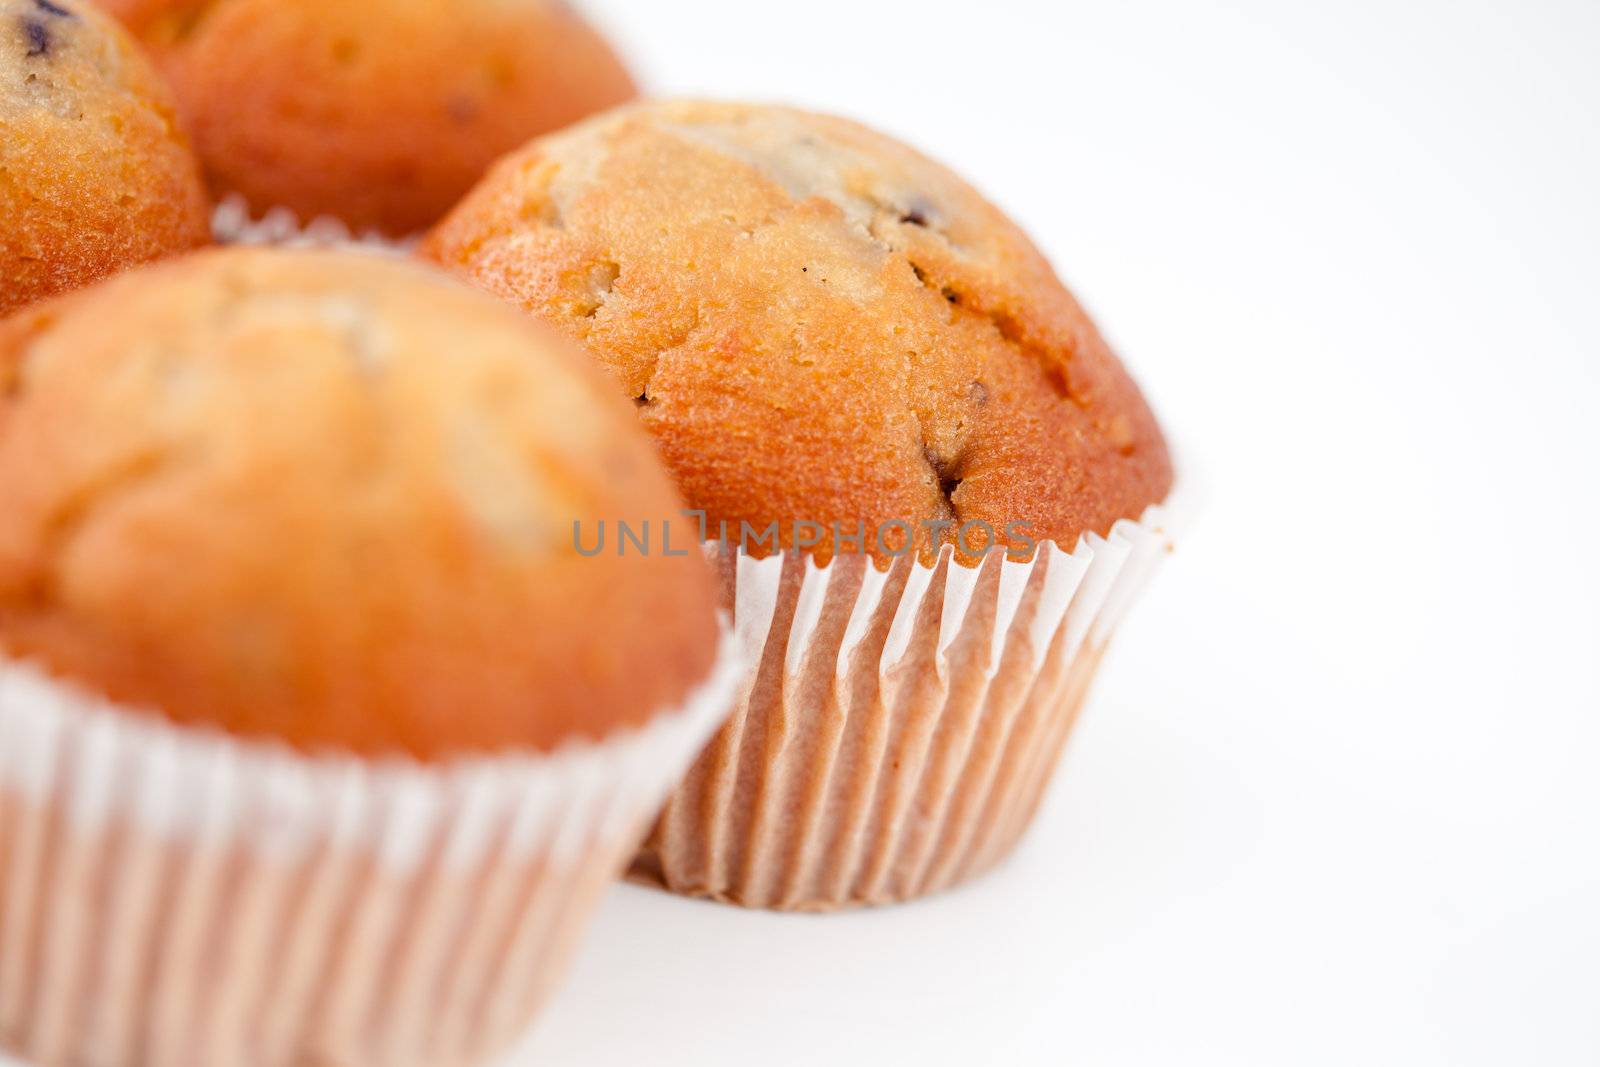 Small blurred muffins against a white background